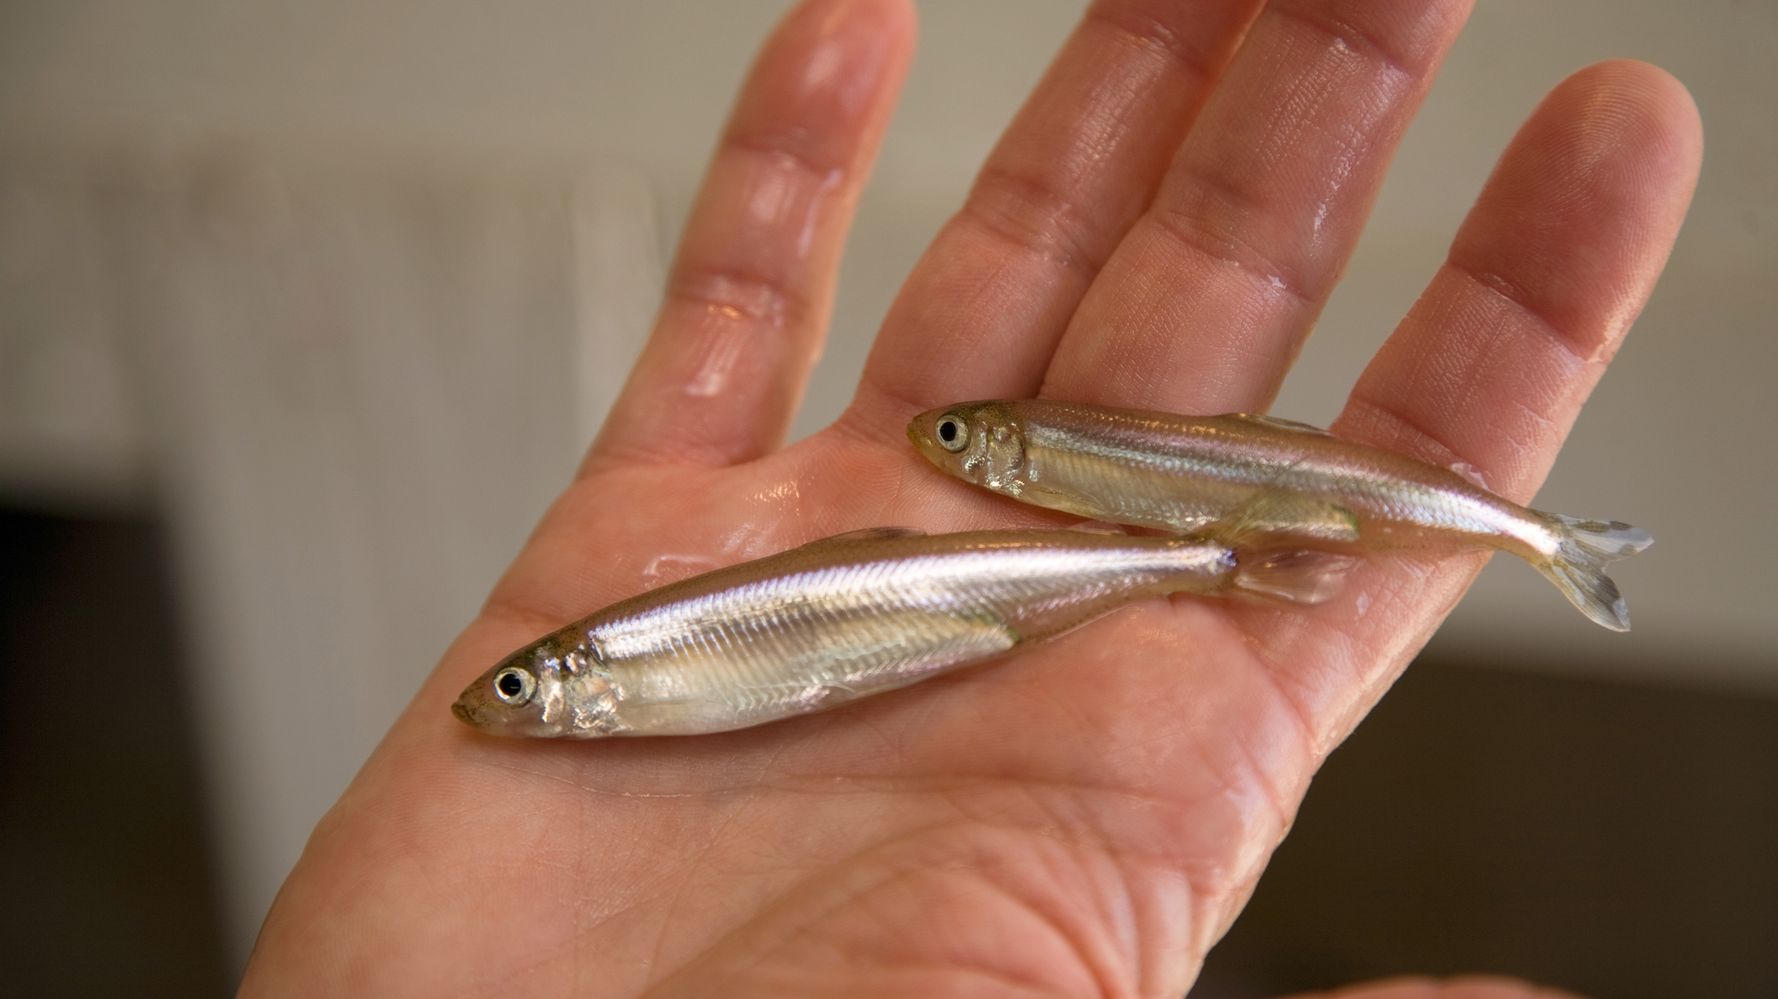 Donald Trump Was Right: Tiny Fish Can Cause Big Water Supply Problems